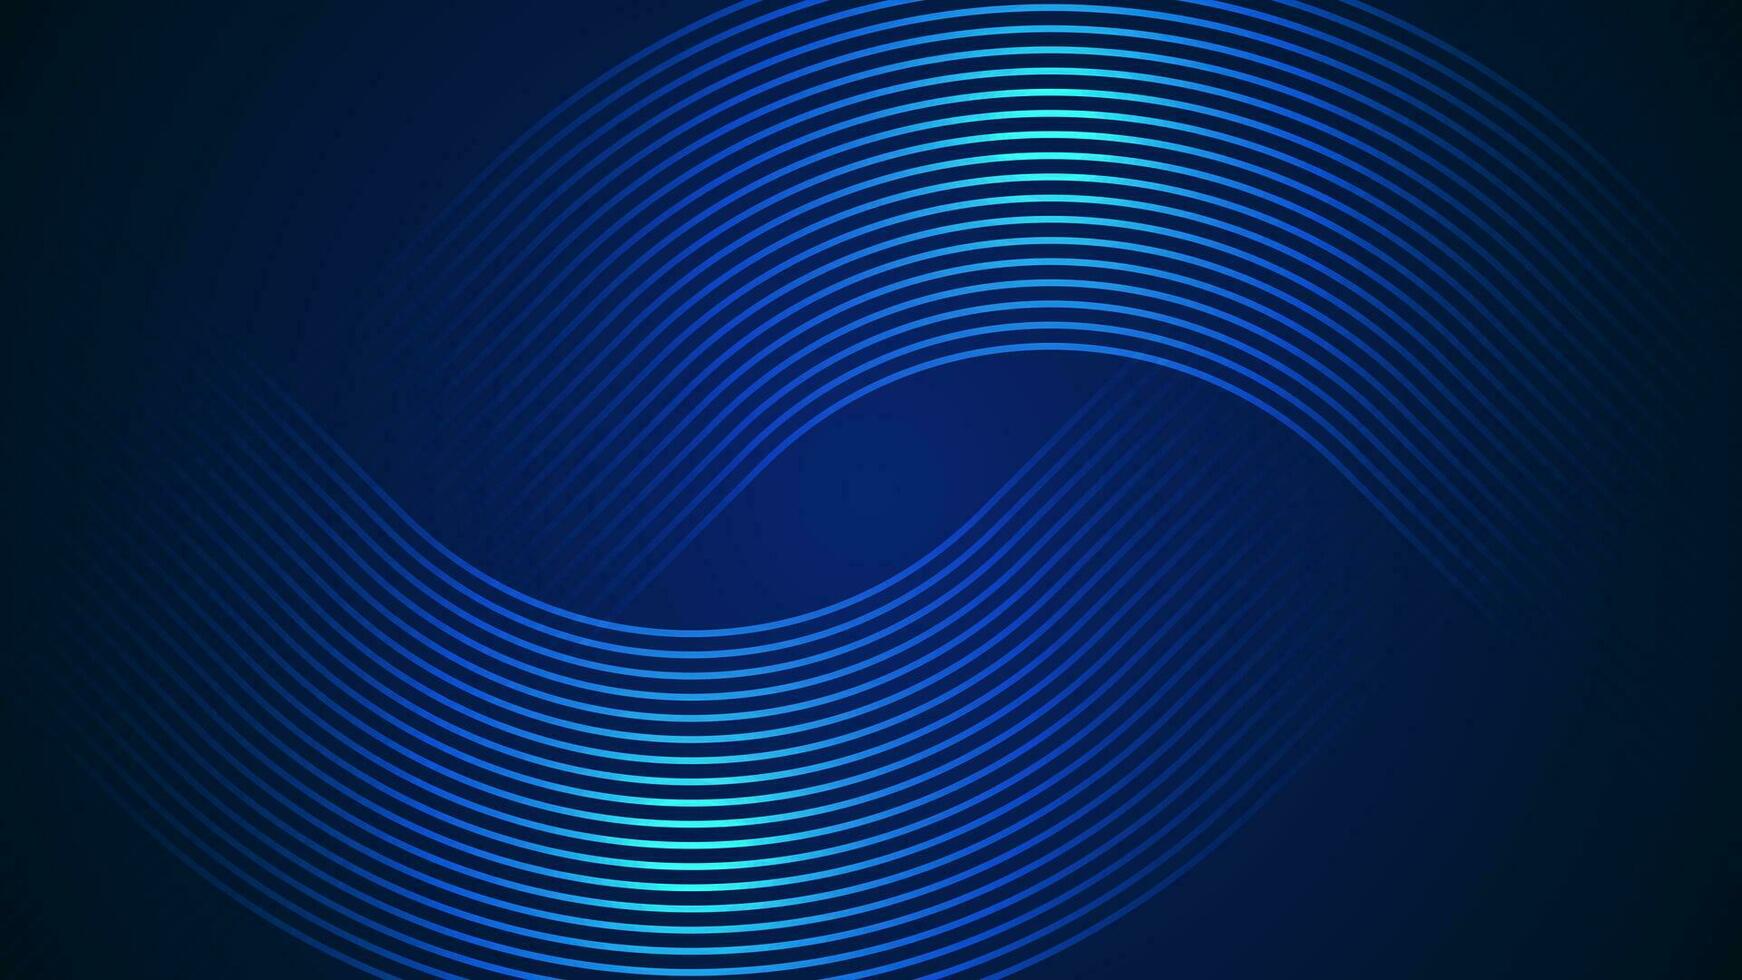 Dark blue simple abstract background with lines in a curved style geometric style as the main element. vector